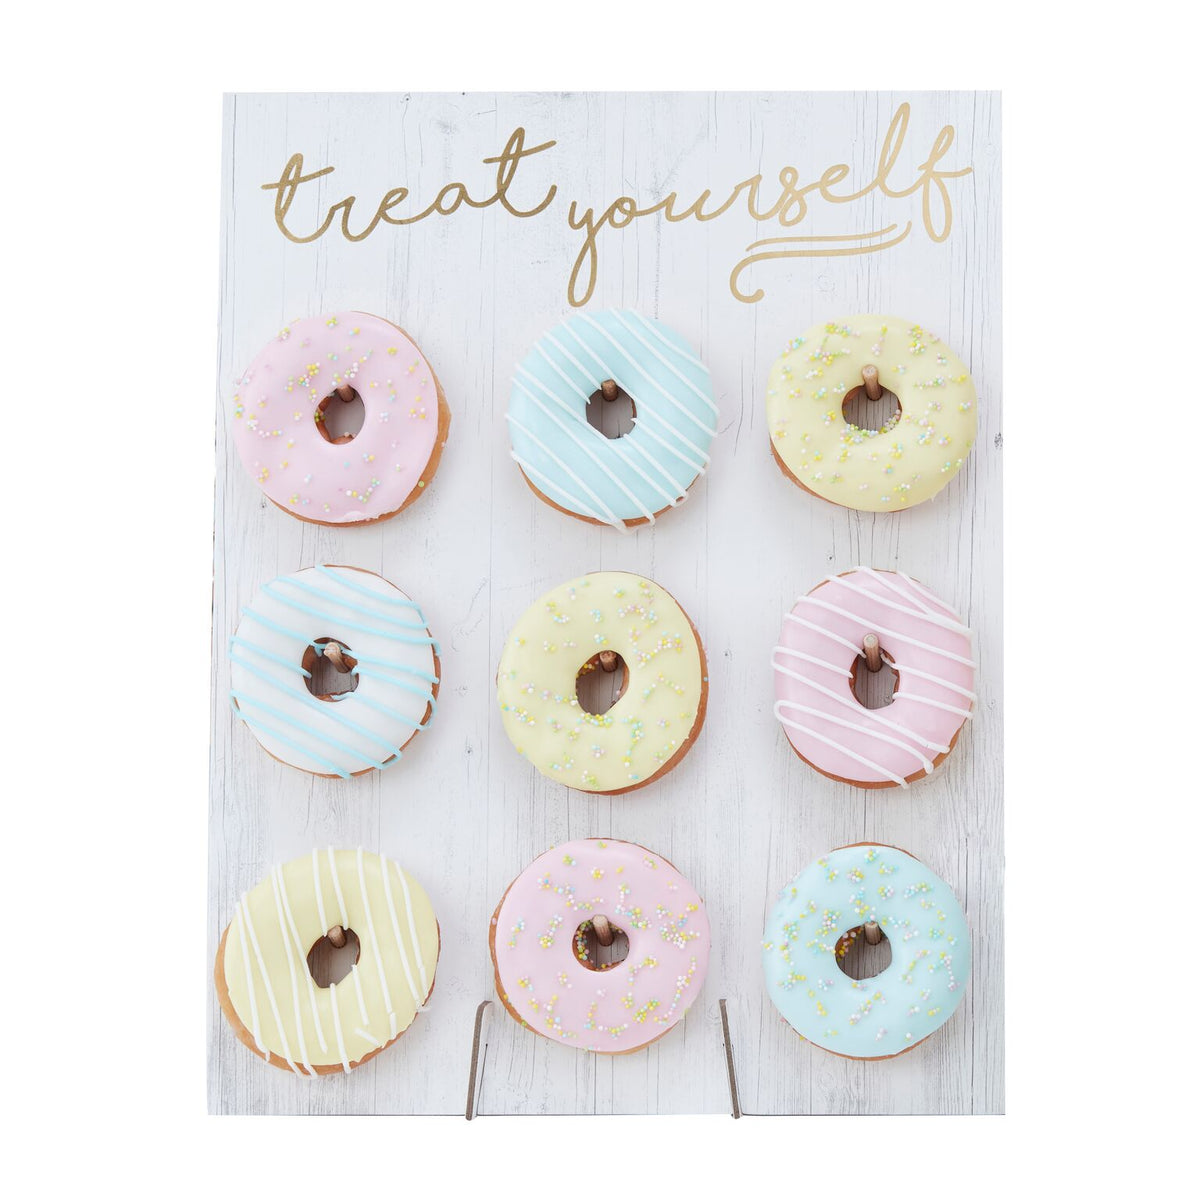 Donut Wall - pastell weiss - 1 Tafeln - 9 Donuts